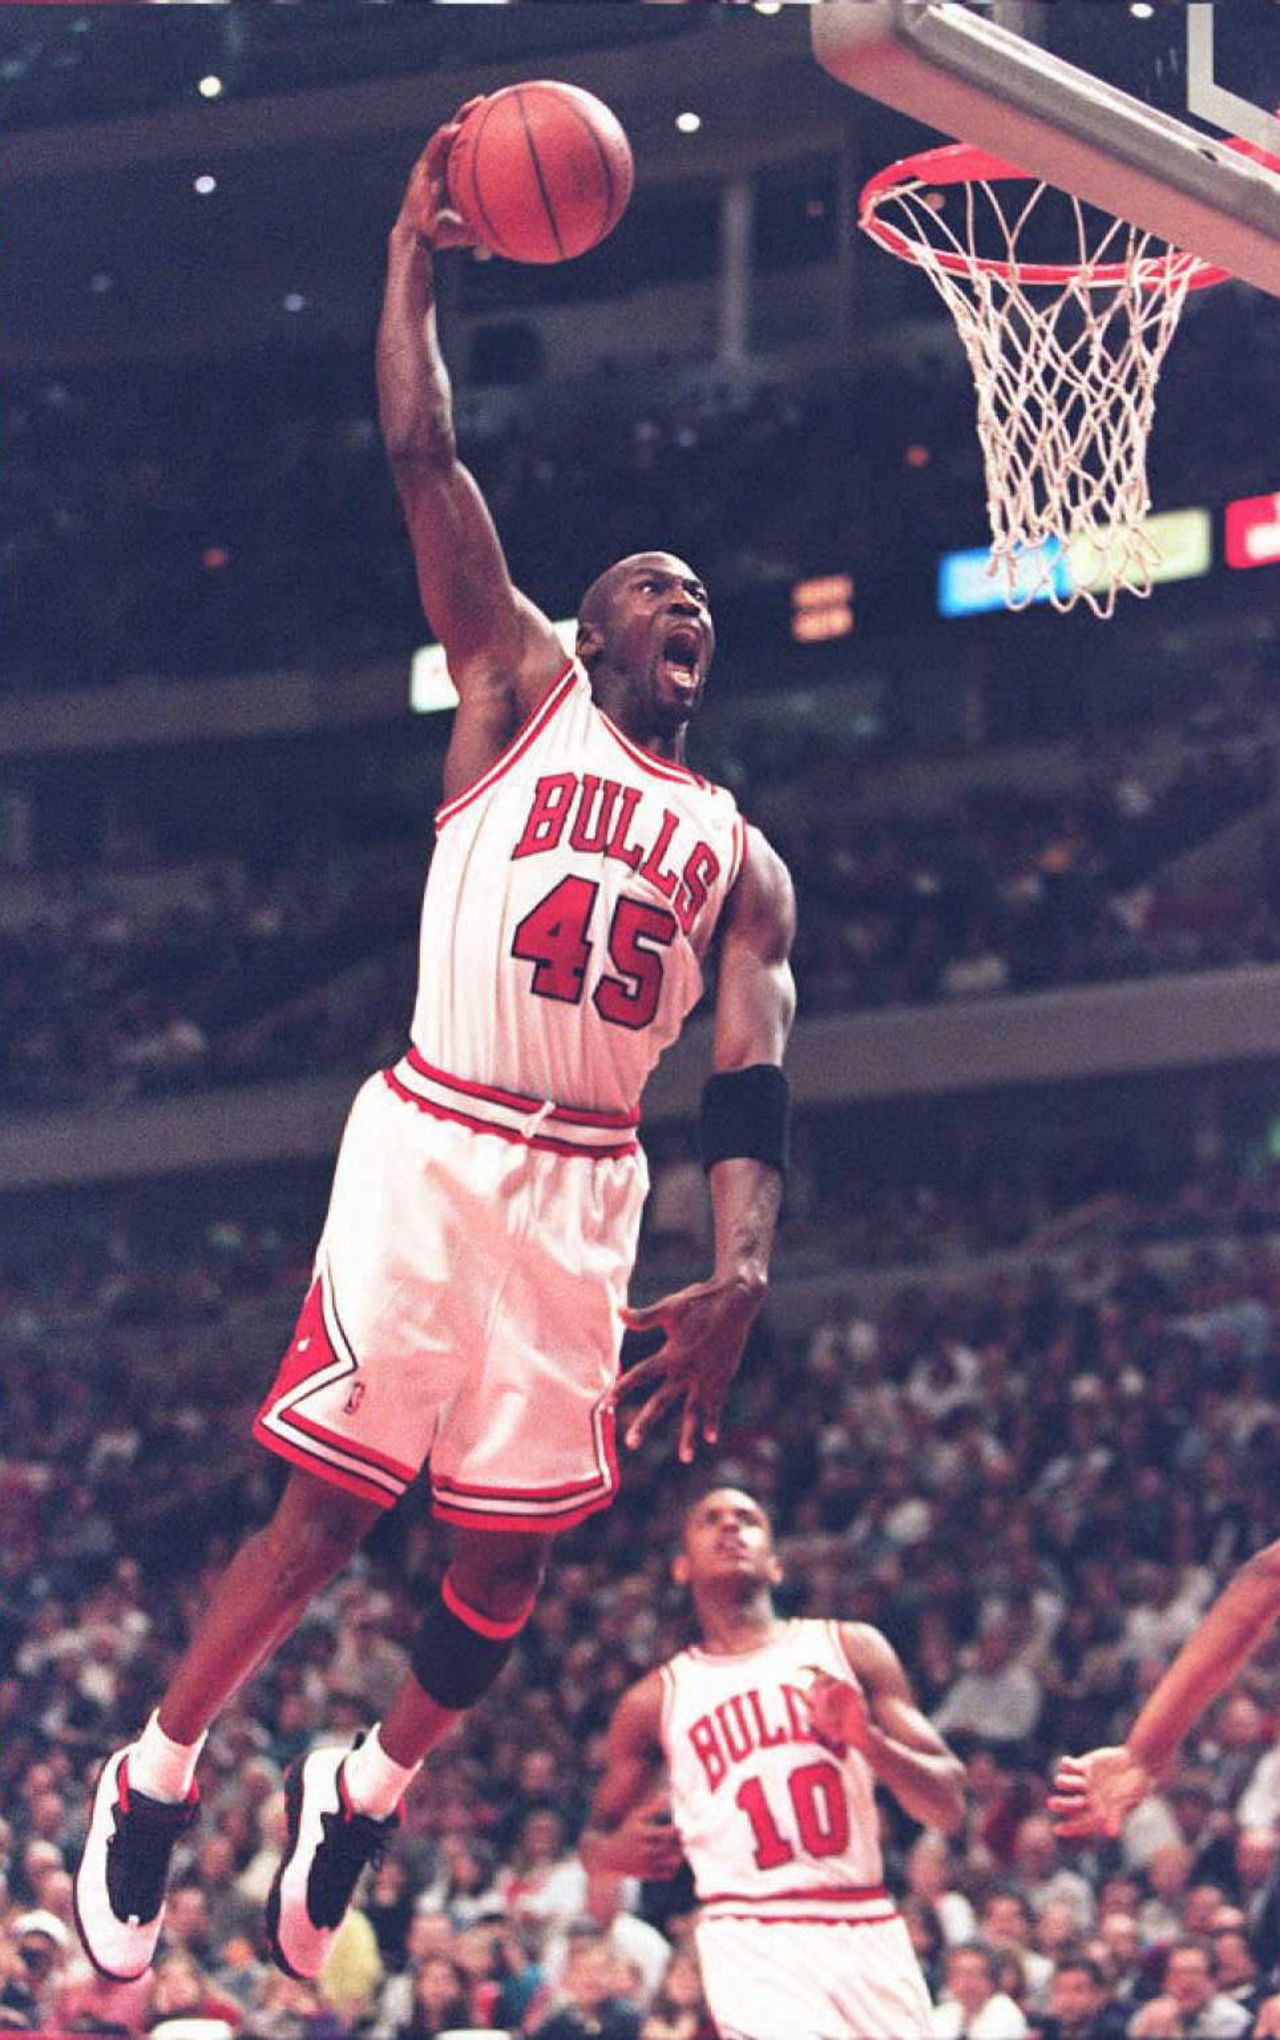 Michael Jordan -- a Hall of Famer and five-time MVP who spent most of his career with the Chicago Bulls -- was another factor in basketball's global growth. His shoes, the famous Nike Air Jordans, transcended the sport into youth culture both in the U.S. and internationally. 